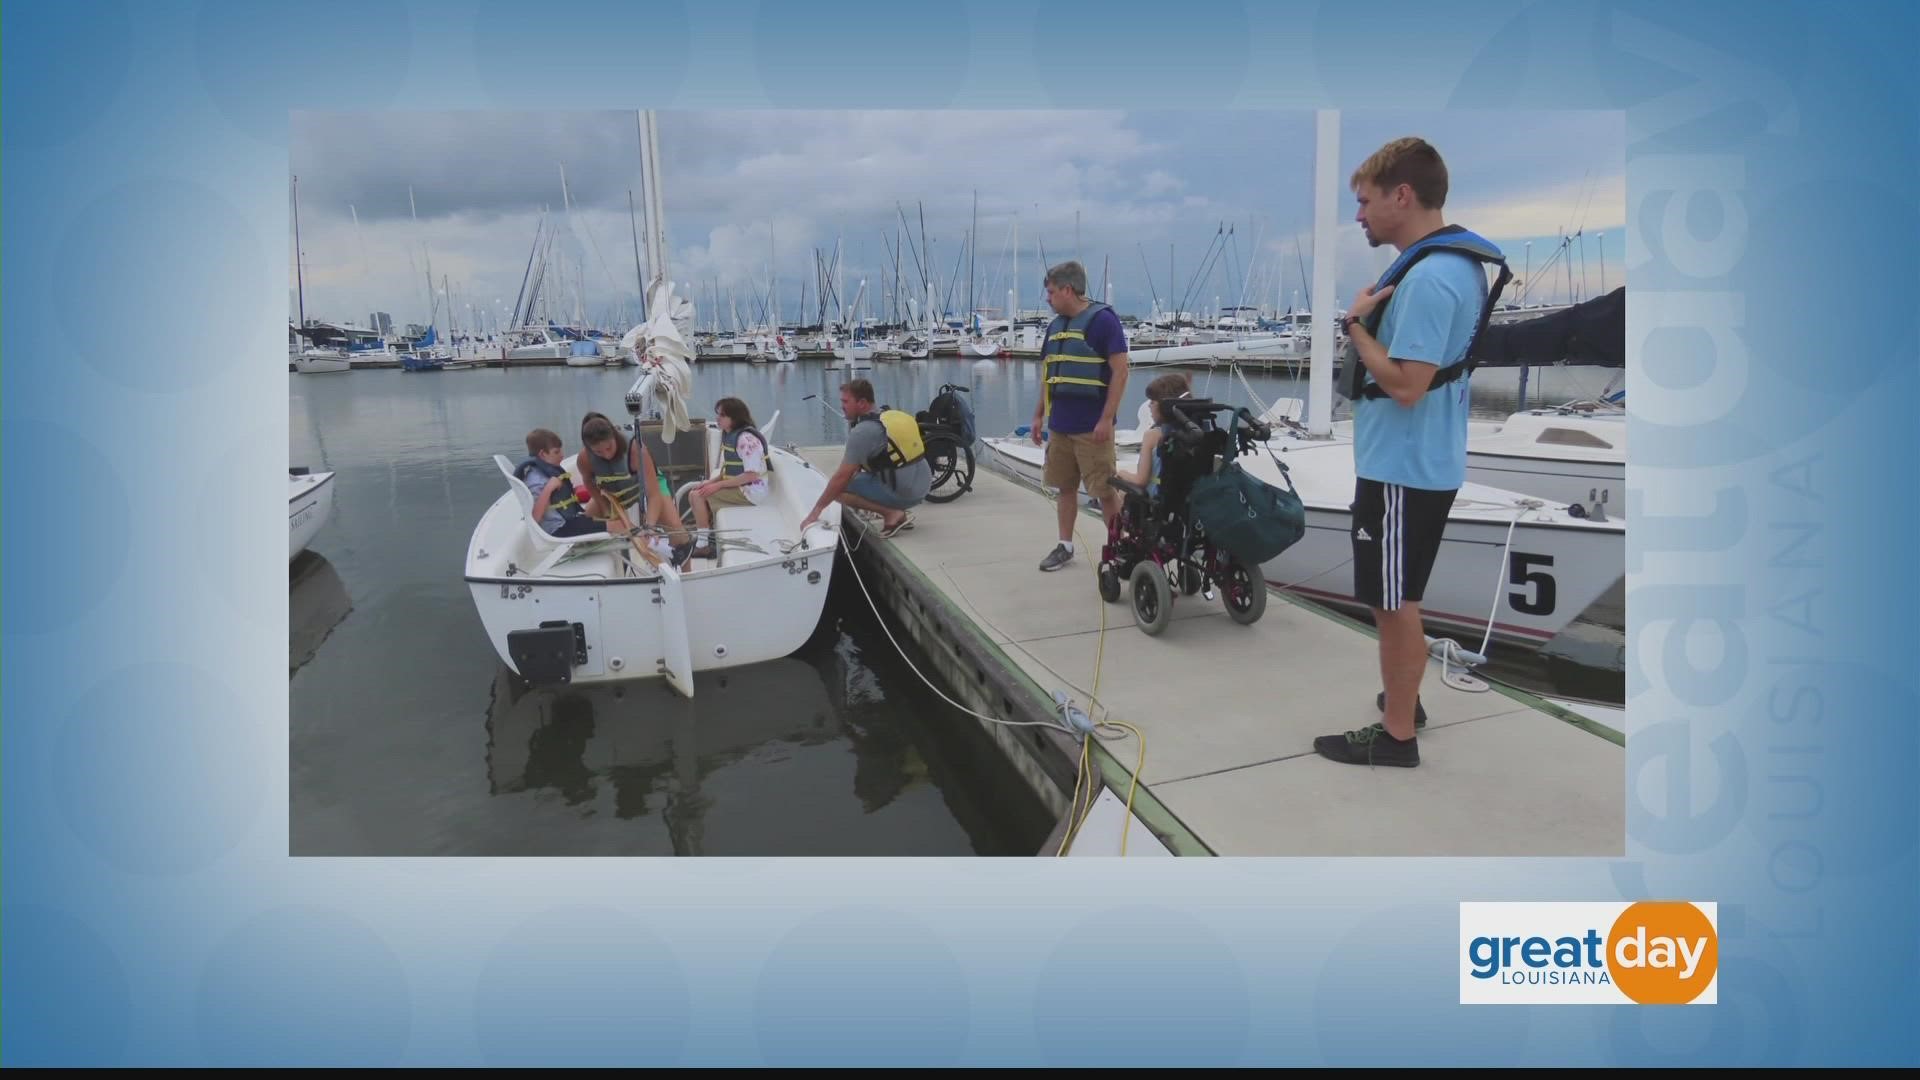 A member of a local nonprofit group shared details about how they are providing opportunities to people to sail on Lake Pontchartrain